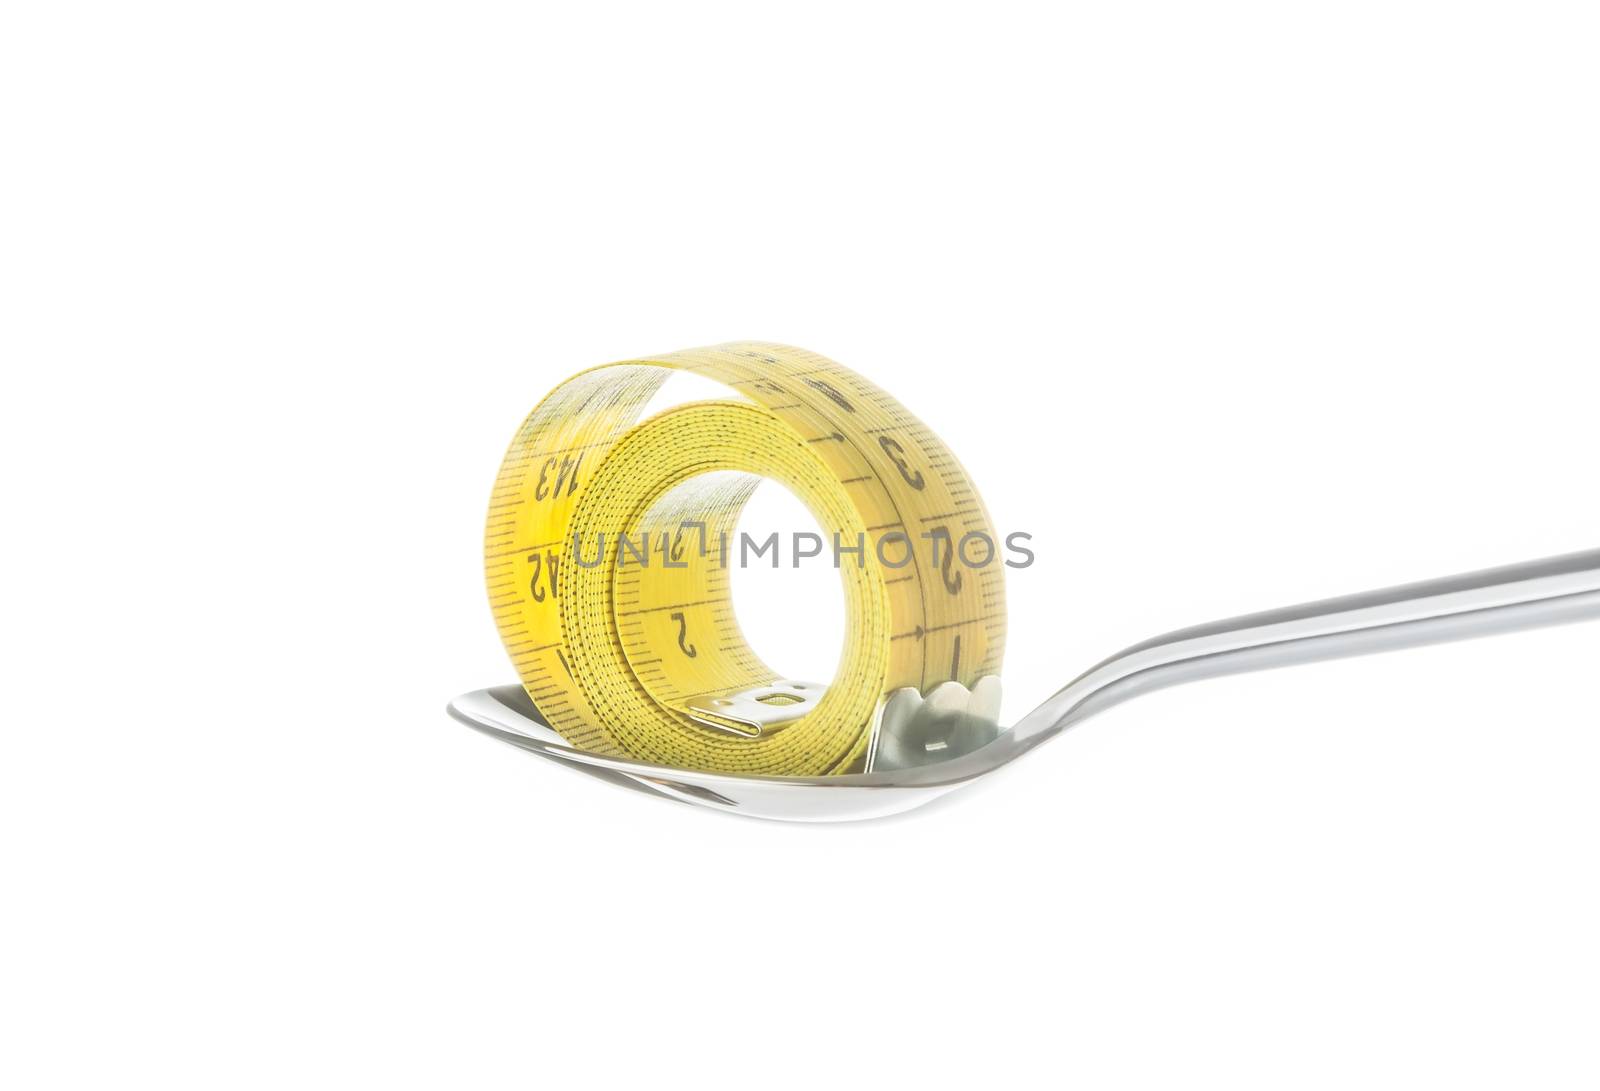 measuring tape on spoon, concept of nutrition and diet on white background